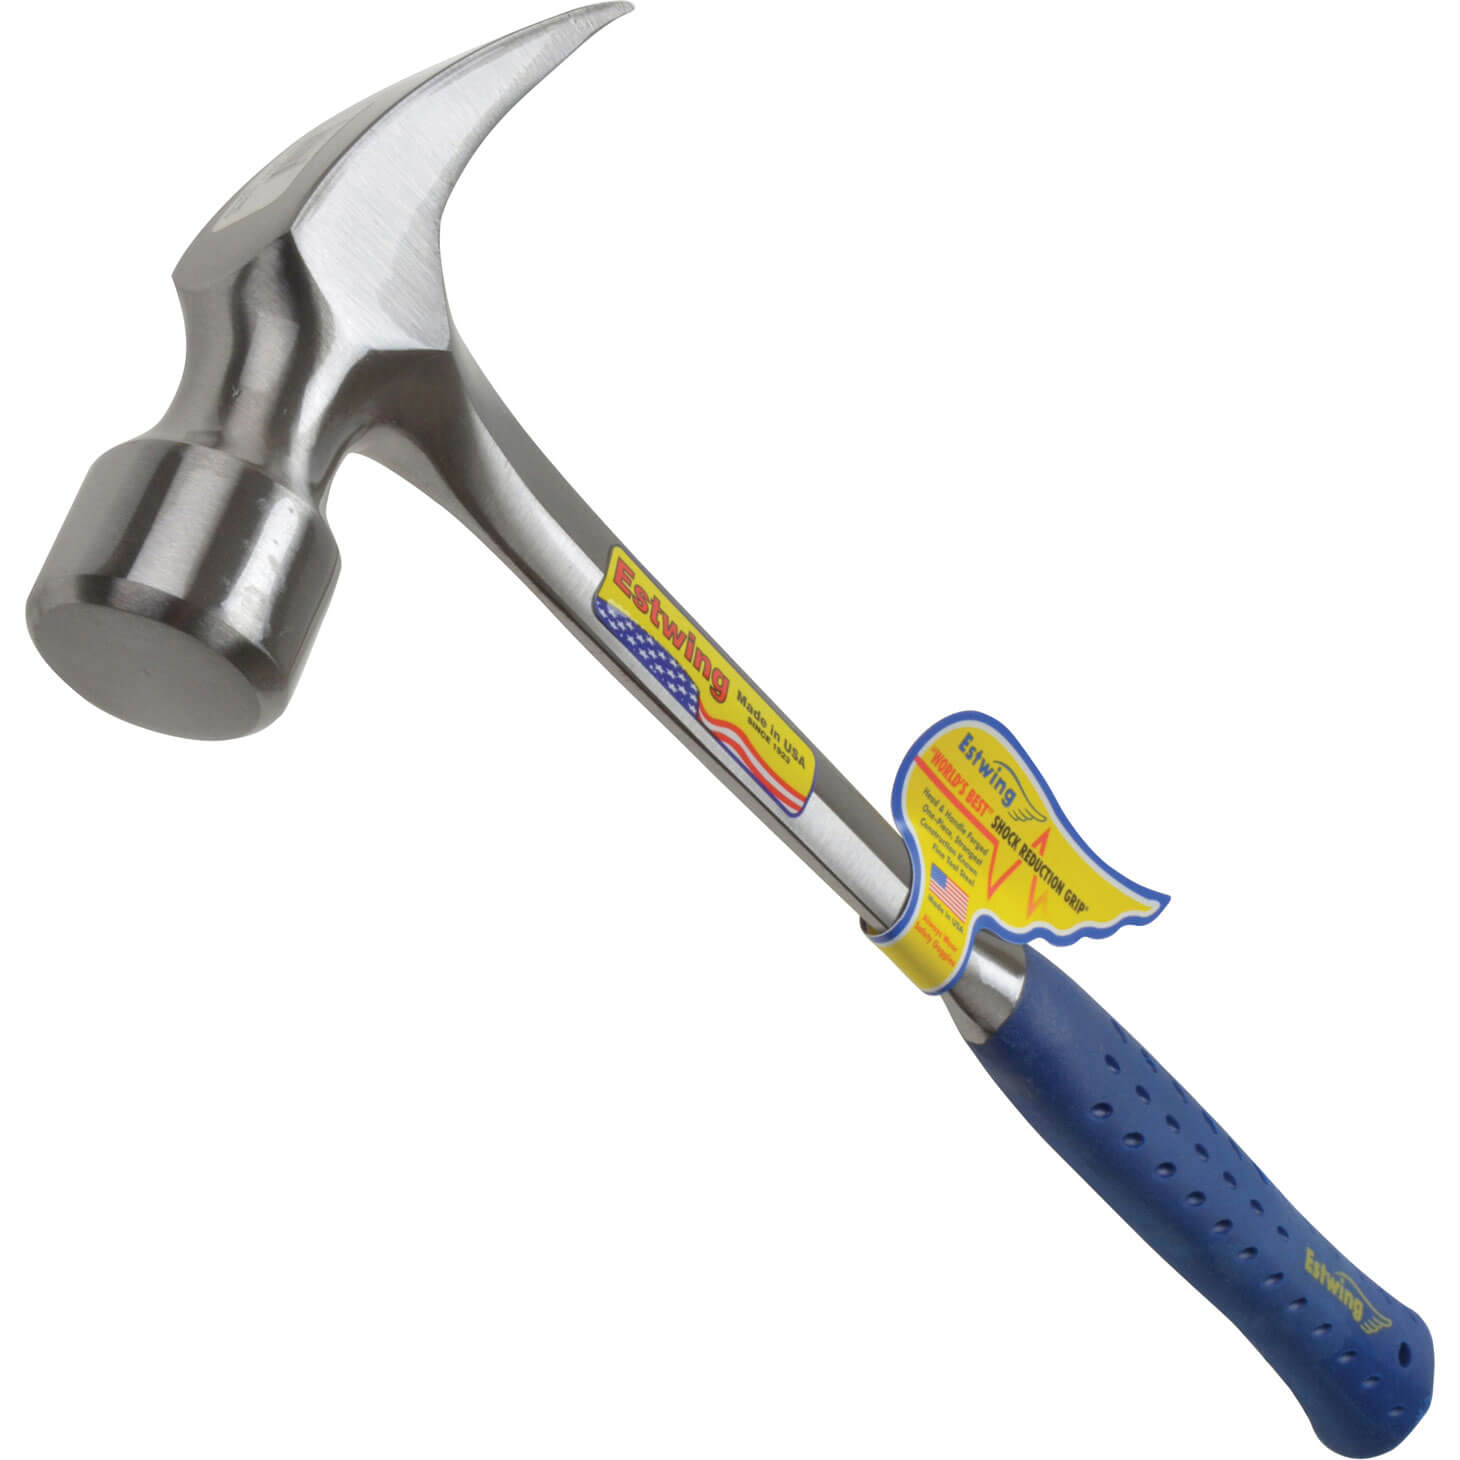 Estwing Straight Claw Framing Hammer 840g